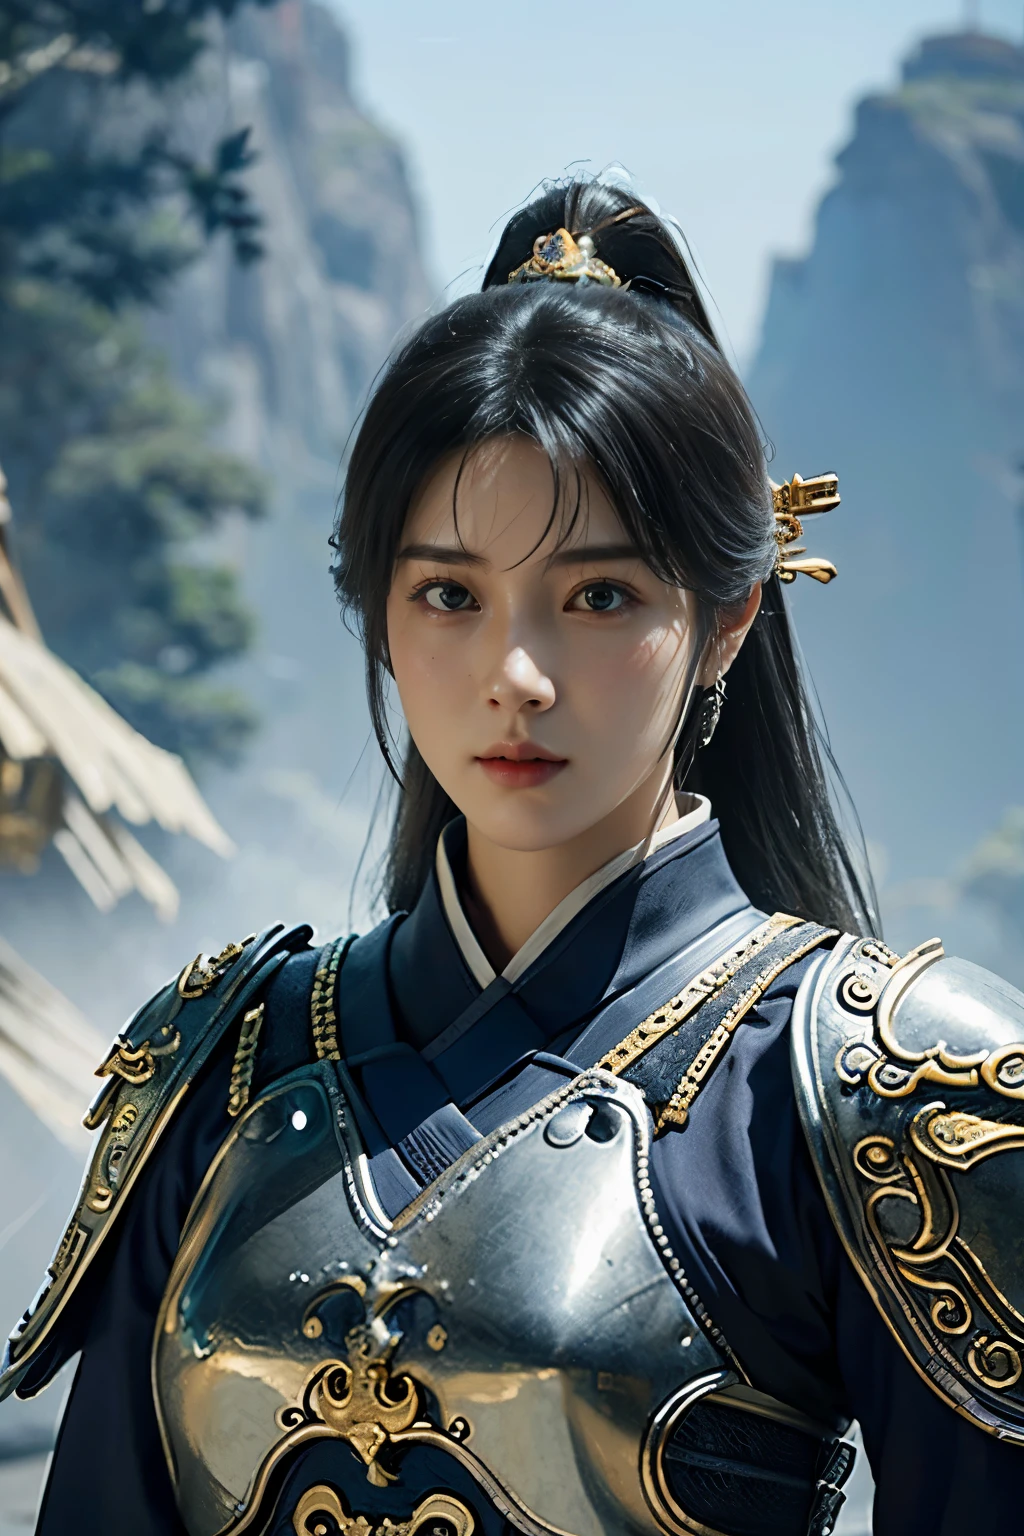 Game art，The best picture quality，Highest resolution，8K，(A bust photograph)，(Portrait)，(Head close-up)，(Rule of thirds)，Unreal Engine 5 rendering works， (The Girl of the Future)，(Female Warrior)， 
15-year-old girl，(The generals of ancient China)，An eye rich in detail，(Big breasts)，Elegant and noble，indifferent，brave，
(Wearing ancient Chinese style armor，Armor of Song Dynasty，Costumes are rich in detail，Metallic luster，Silver gray)，Chinese Characters，Fantasy style，
Photo poses，Field background，Movie lights，Ray tracing，Game CG，((3D Unreal Engine))，oc rendering reflection pattern